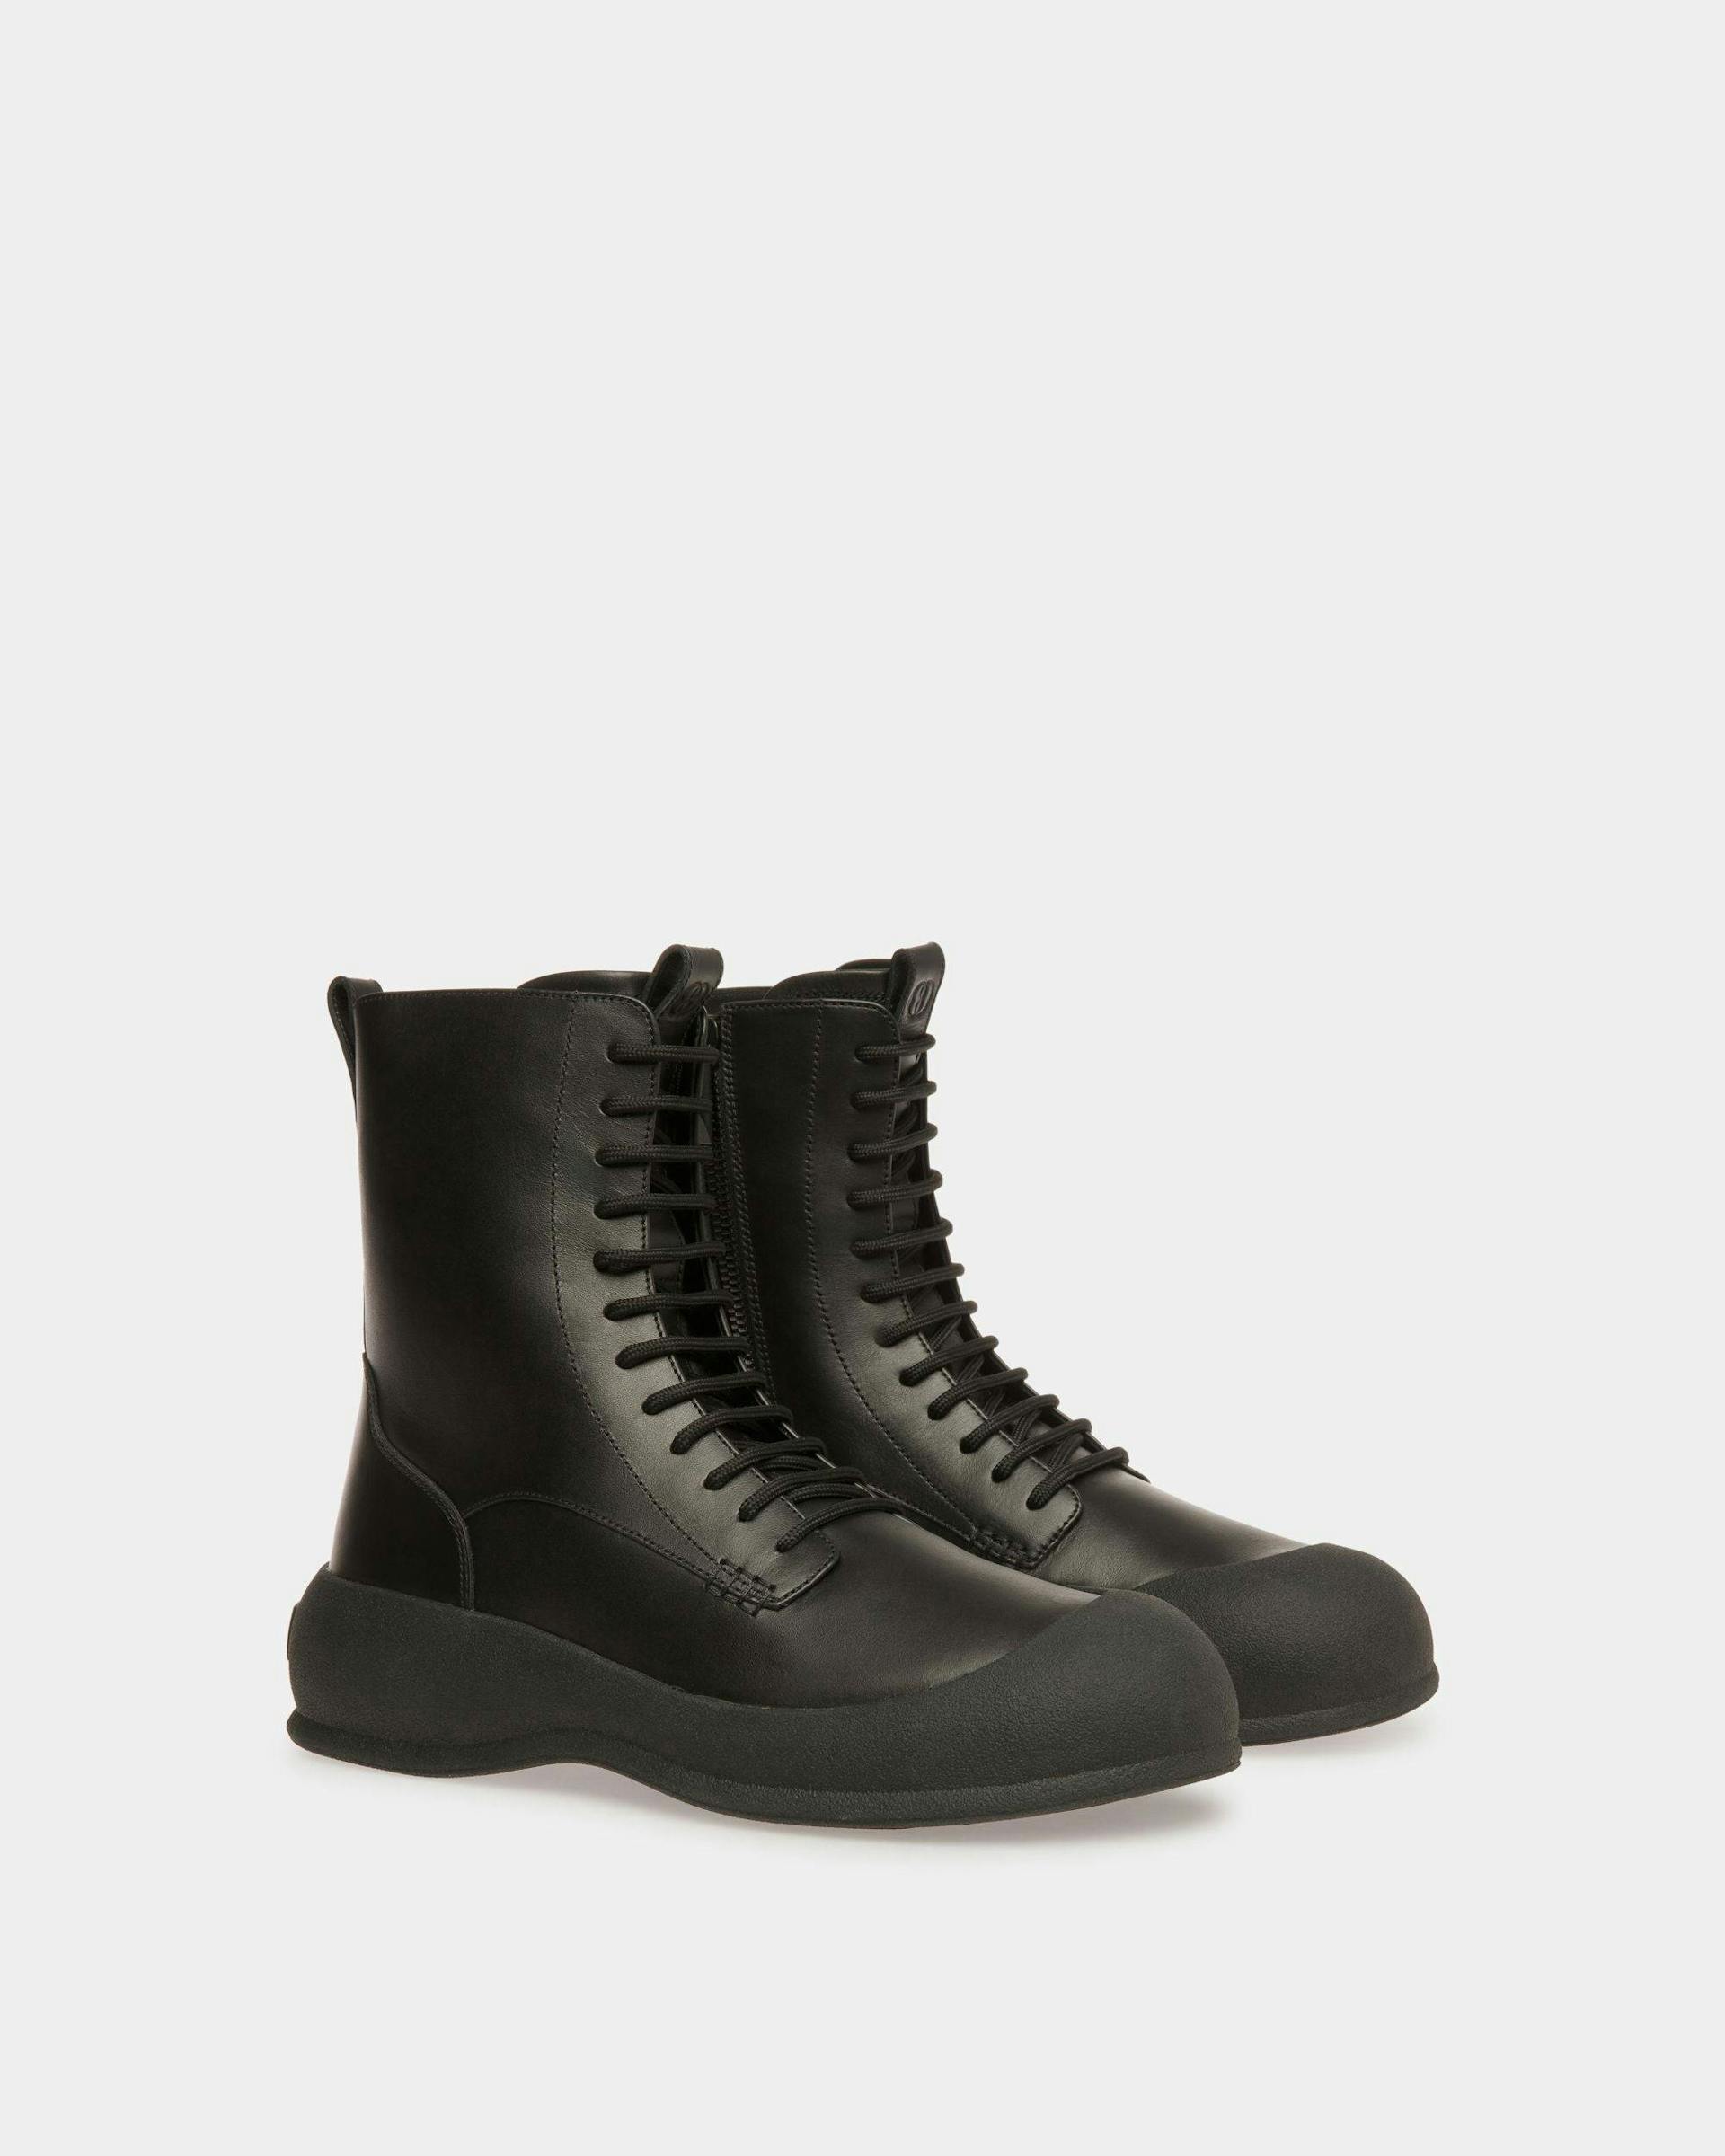 Men's Frei Snow Boots In Black Leather | Bally | Still Life 3/4 Front